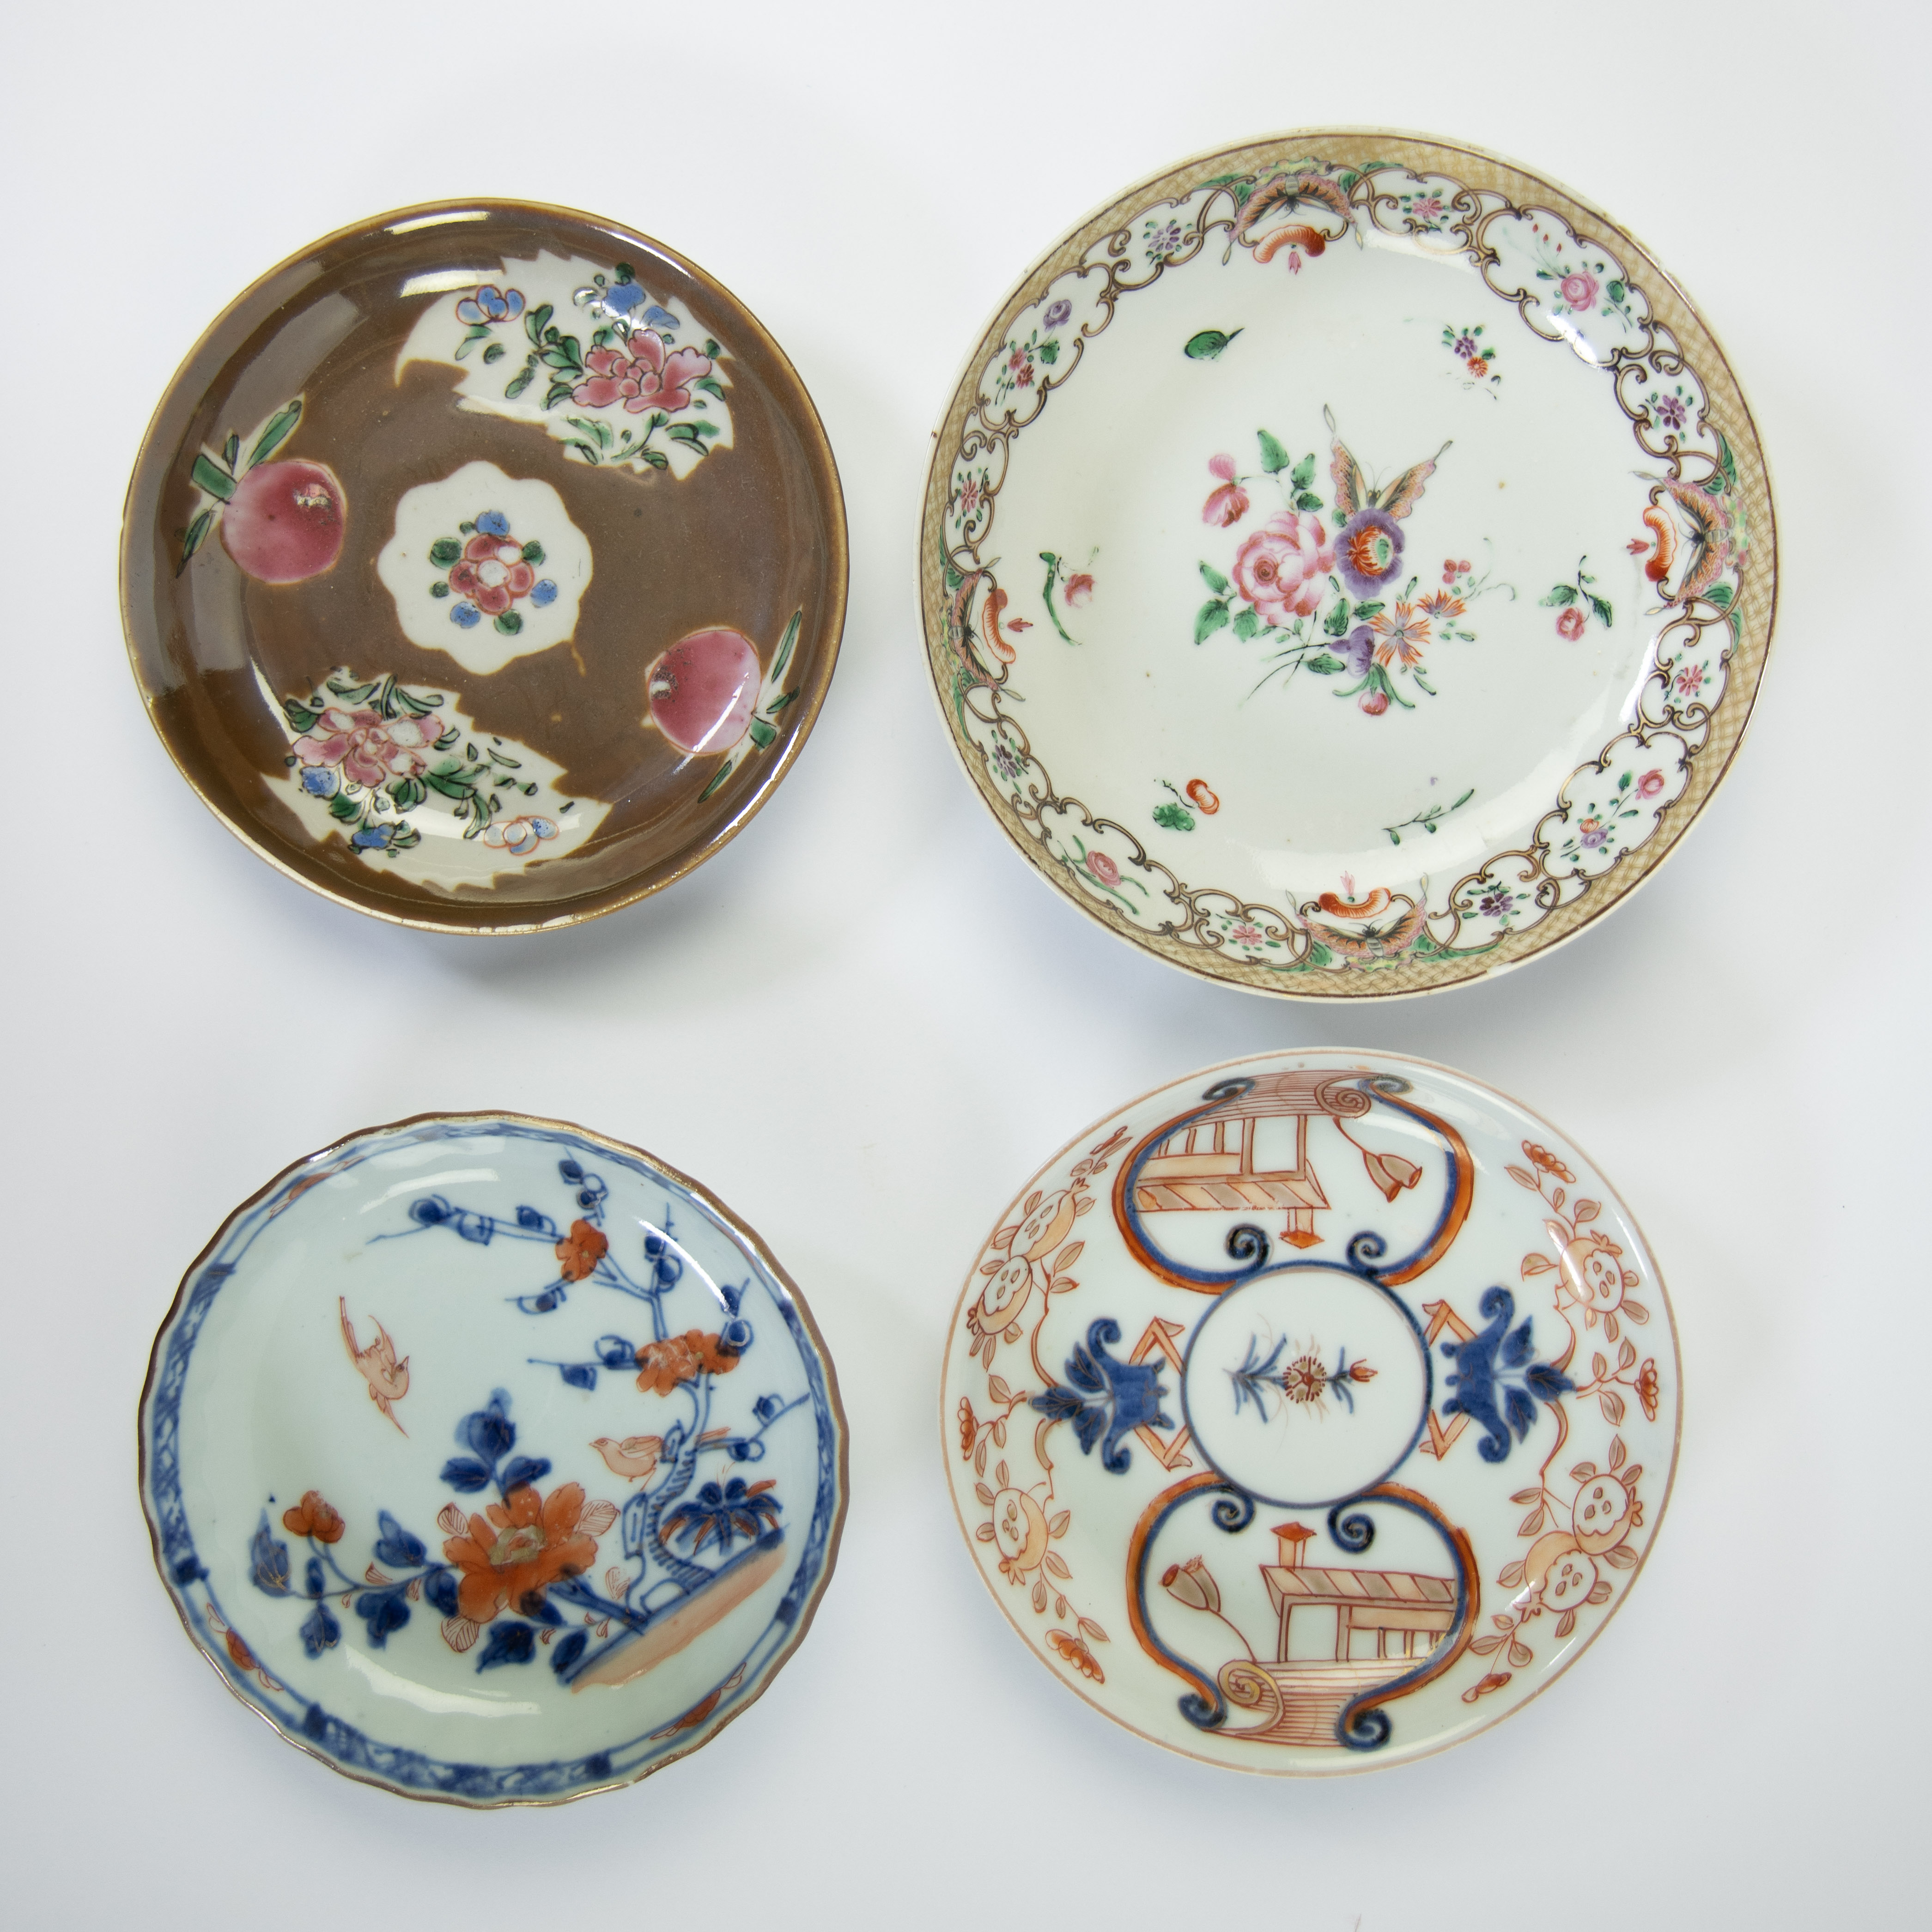 Collection of Chinese porcelain 18th/19th century, famille rose, Imari - Image 2 of 10